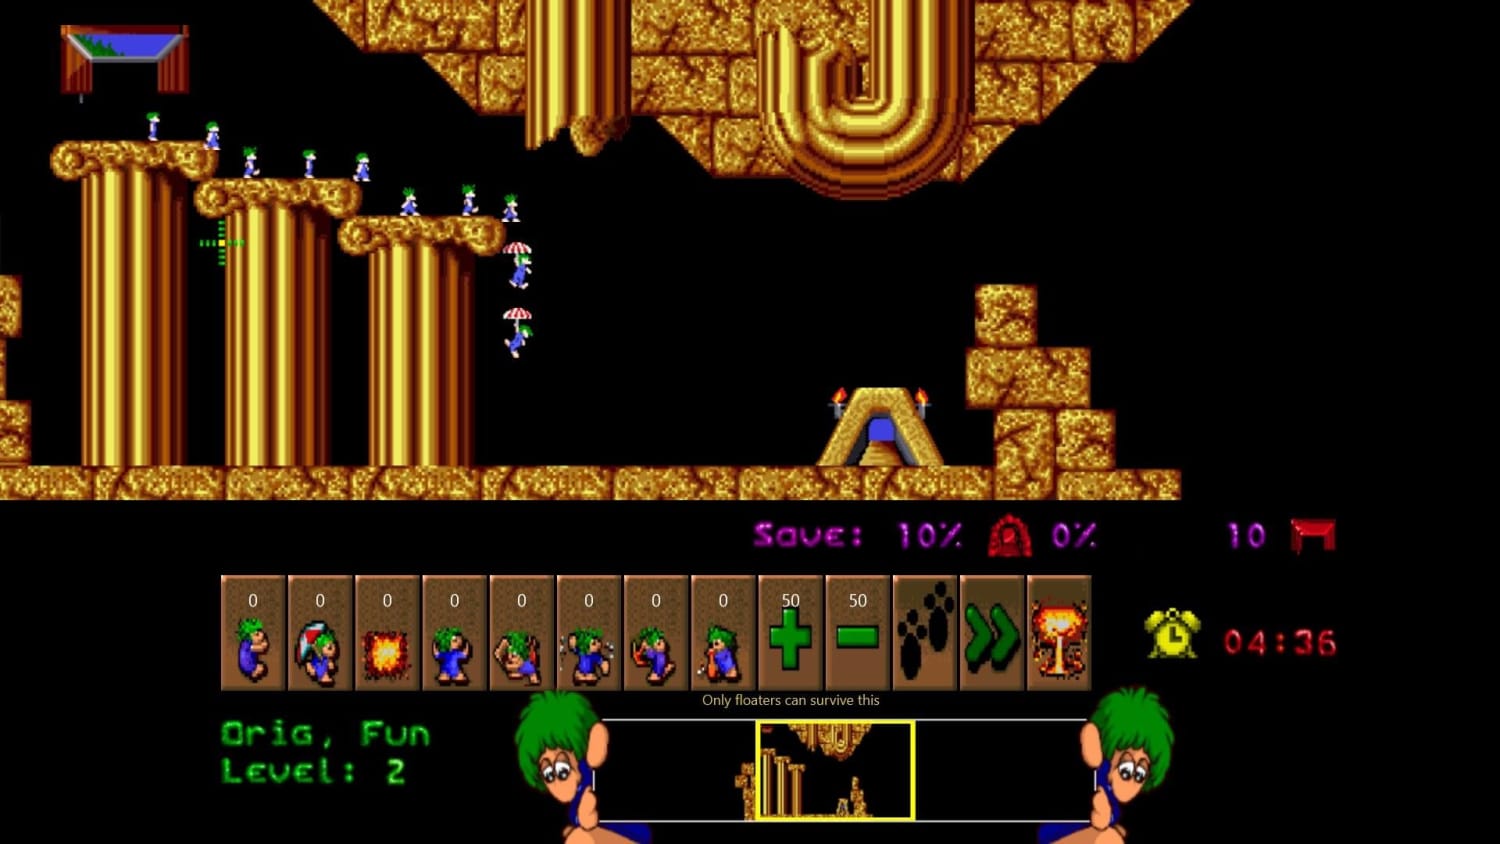 The sprites clearly do not look like actual lemmings': the inside